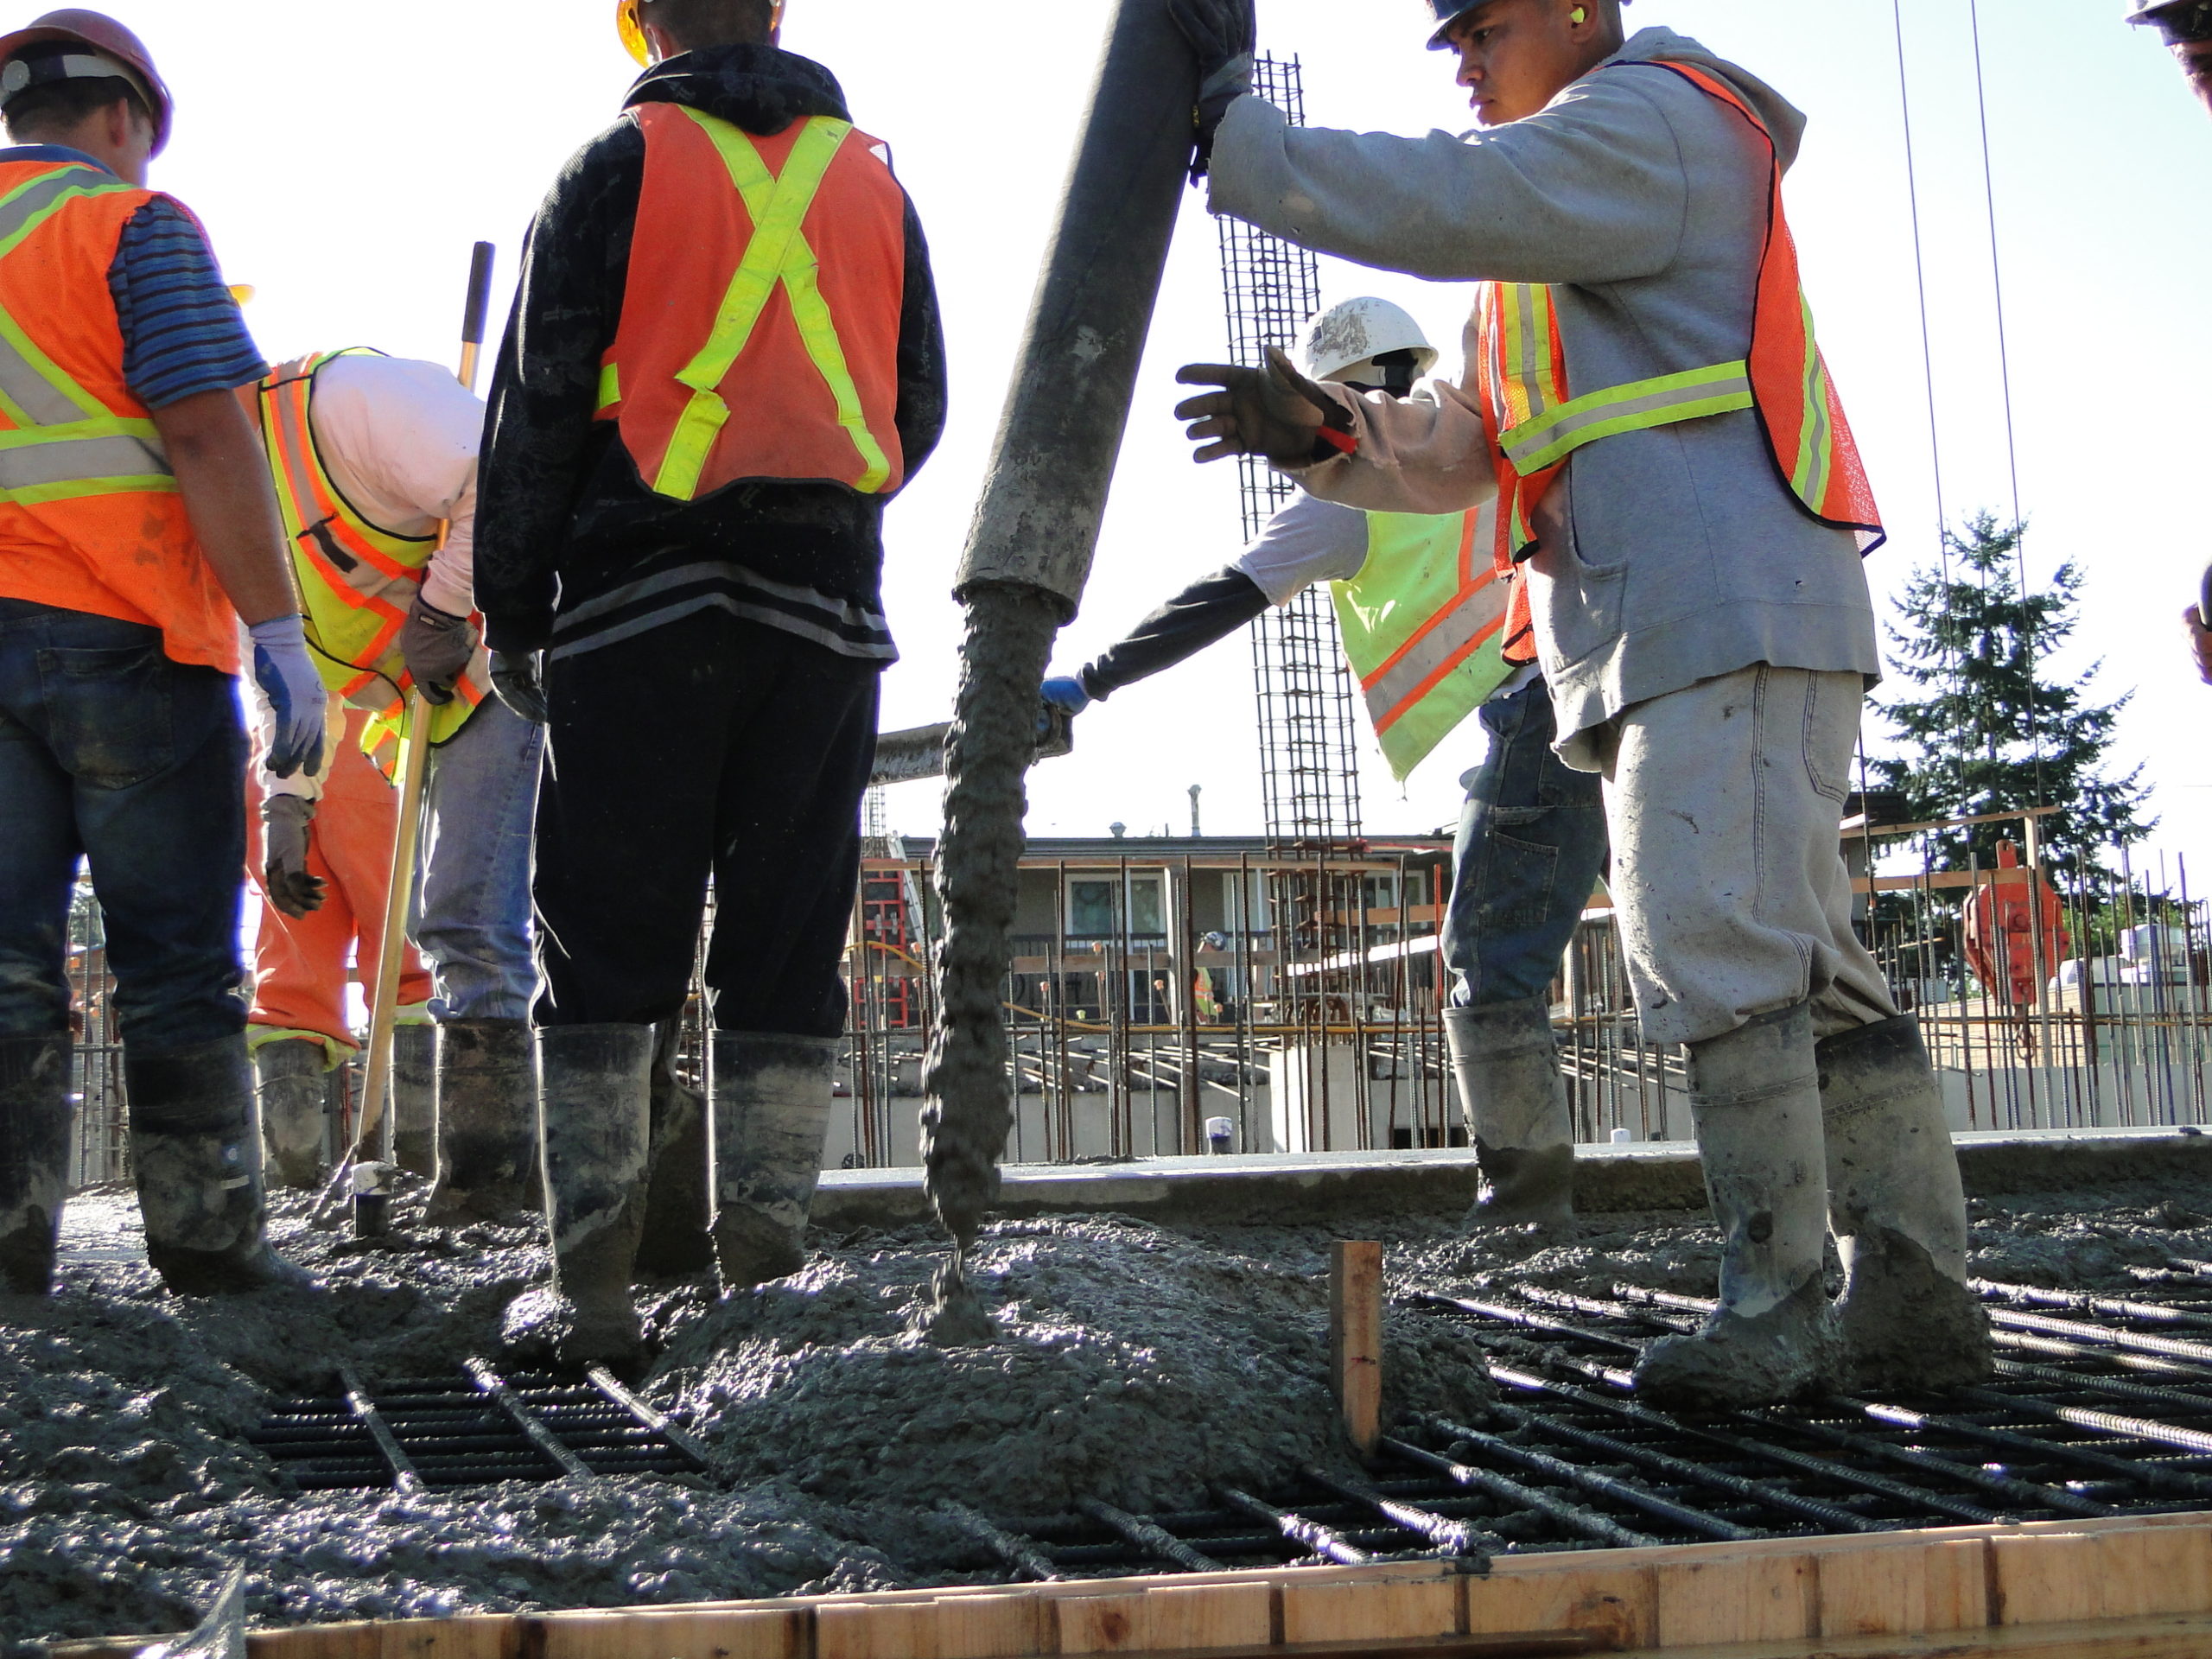 A group of construction workers are working on pouring concrete at a worksite.